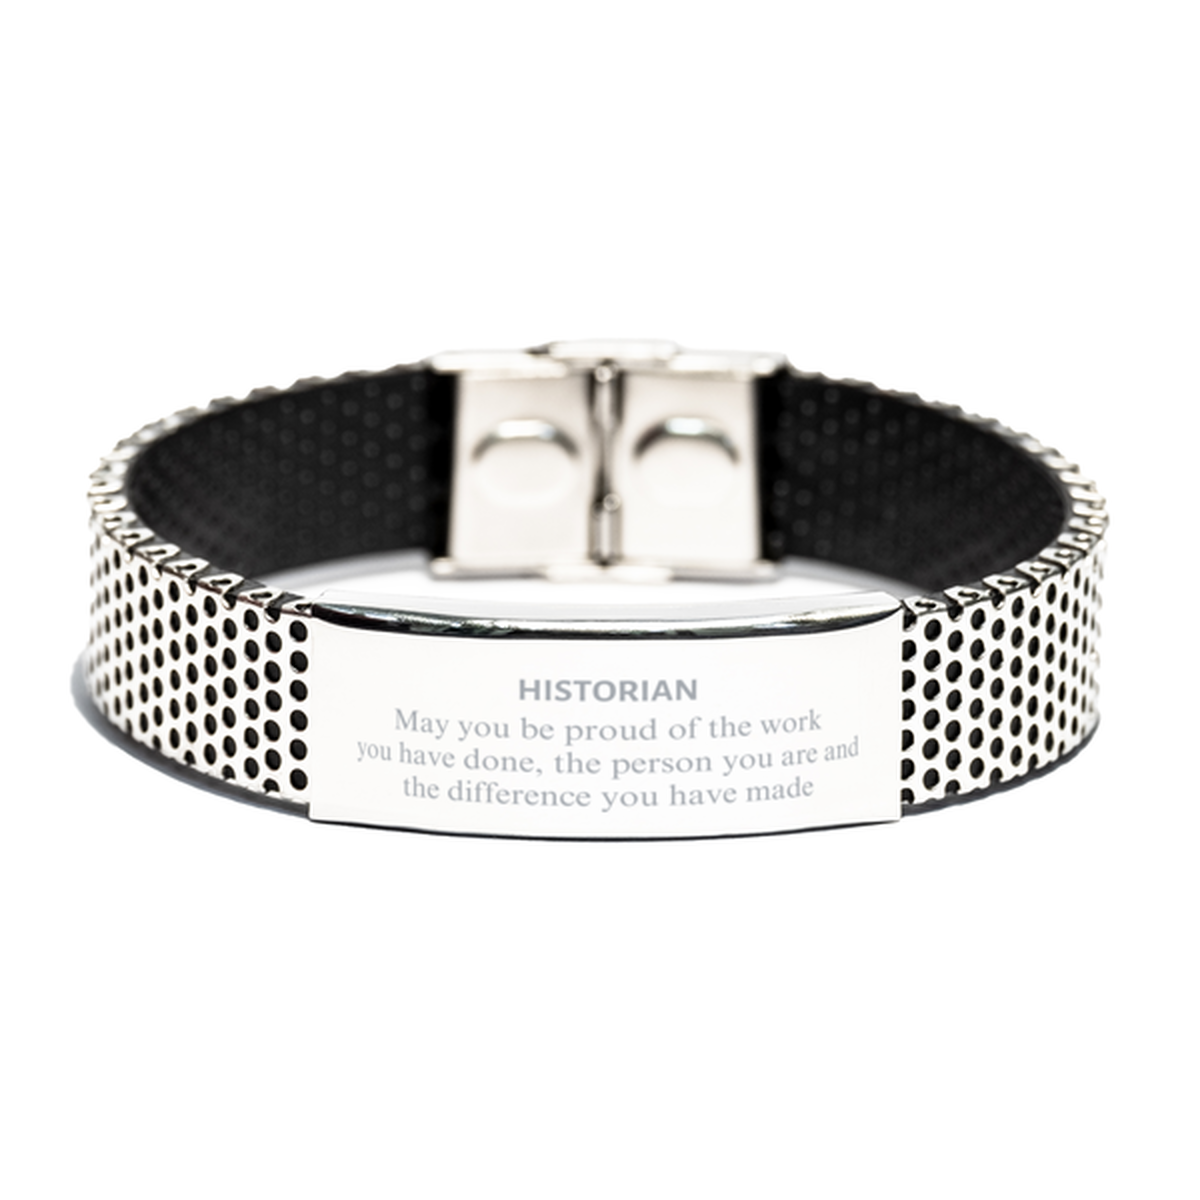 Historian May you be proud of the work you have done, Retirement Historian Stainless Steel Bracelet for Colleague Appreciation Gifts Amazing for Historian